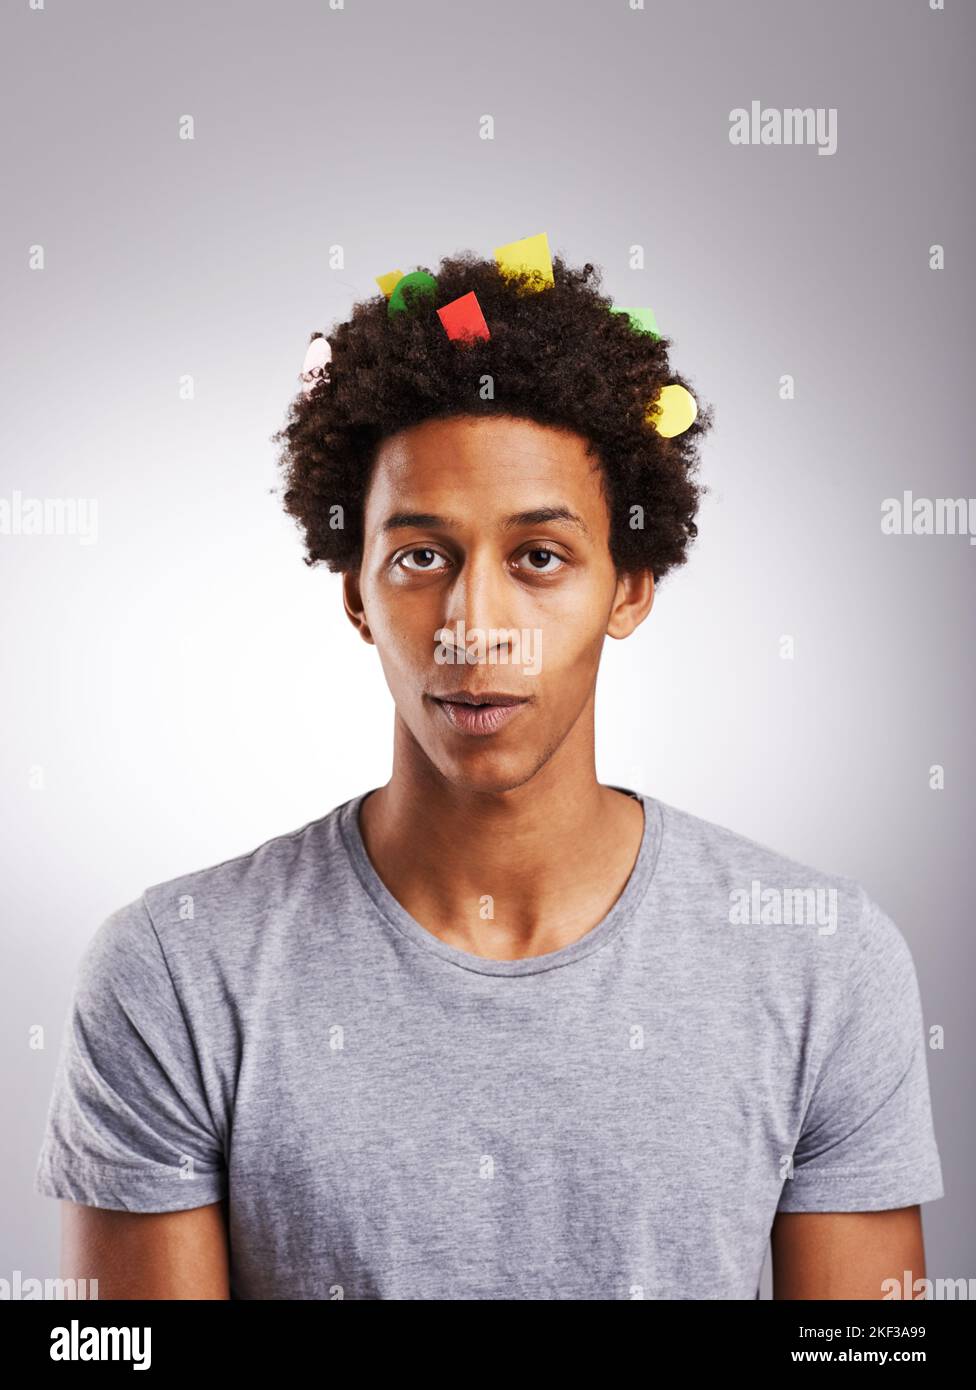 Just go with the fro. a young man with colorful paper in his hair against a gray background. Stock Photo